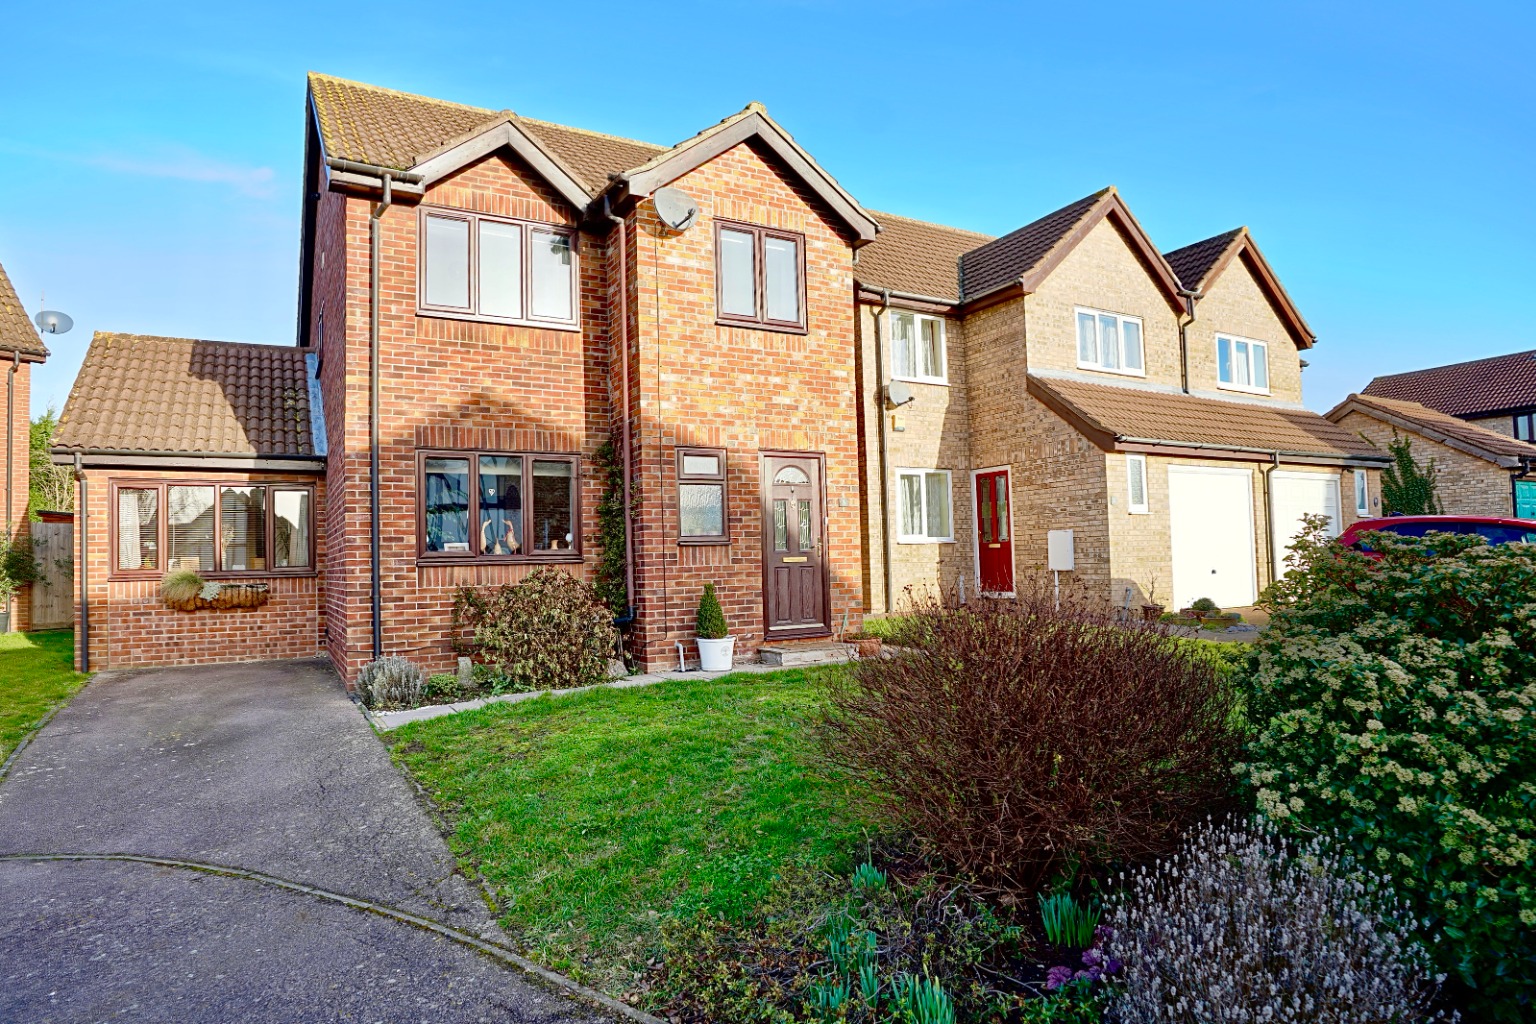 3 bed detached house for sale in Osprey Close, Huntingdon - Property Image 1